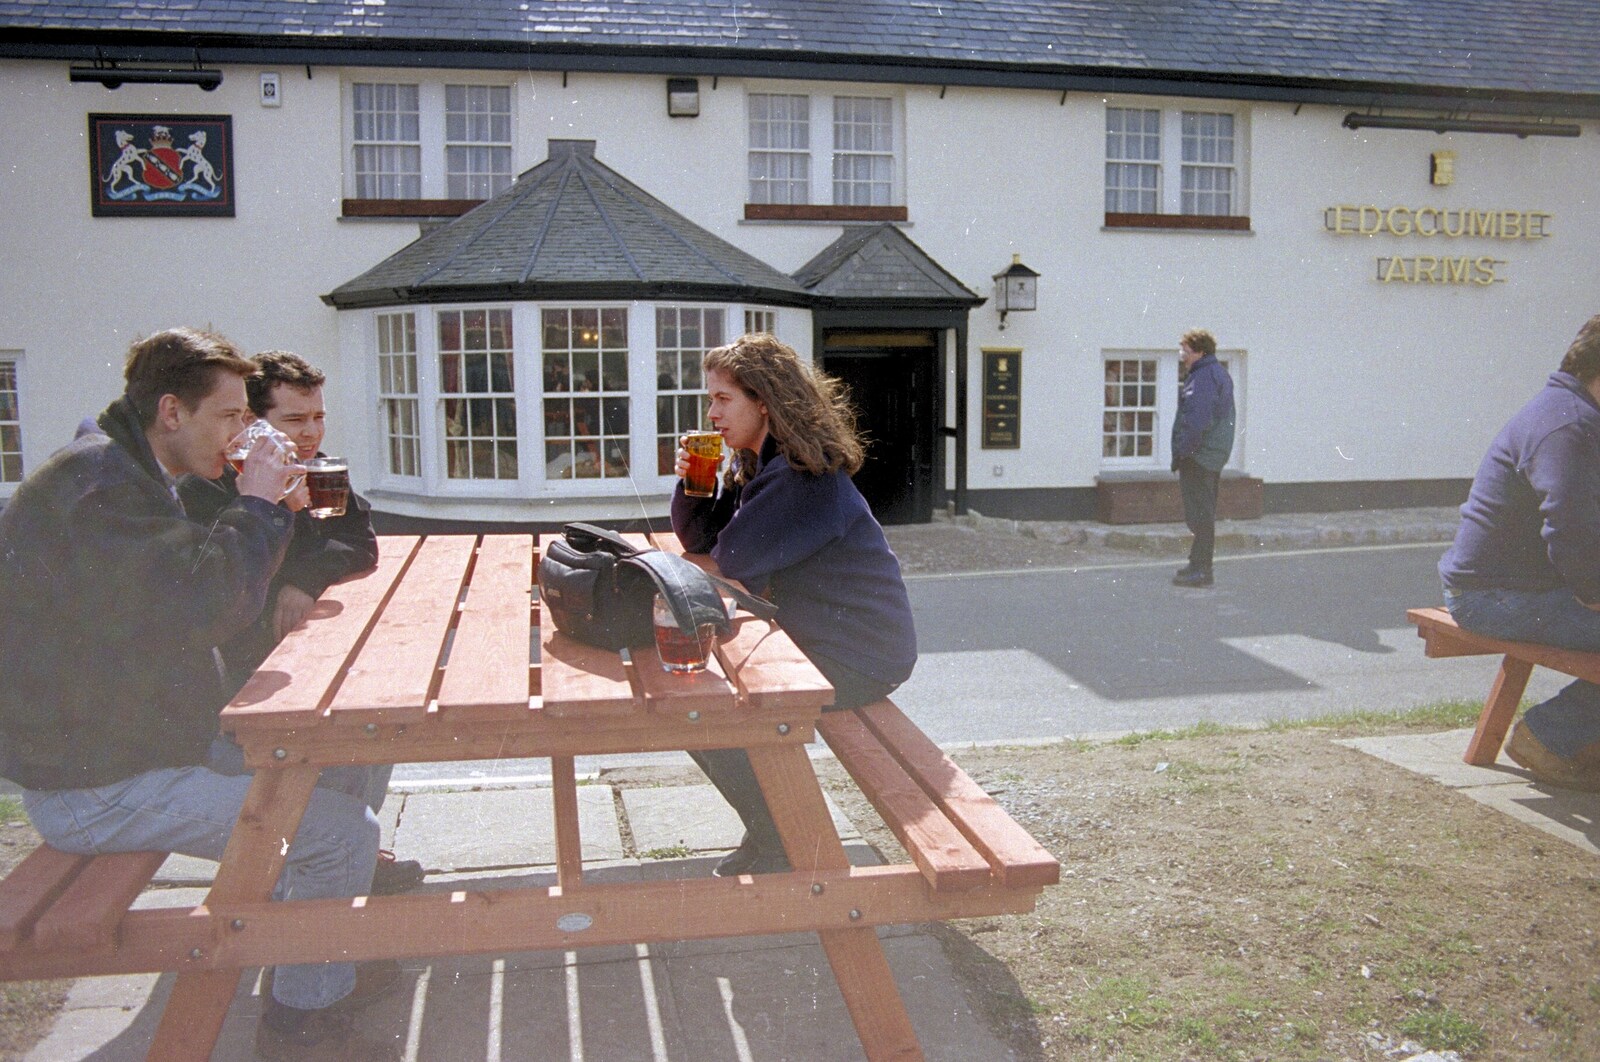 Andrew, Russel and Vicky at the Edgecumbe Arms from Uni: A CISU Trip To Plymouth, Devon - 16th March 1996